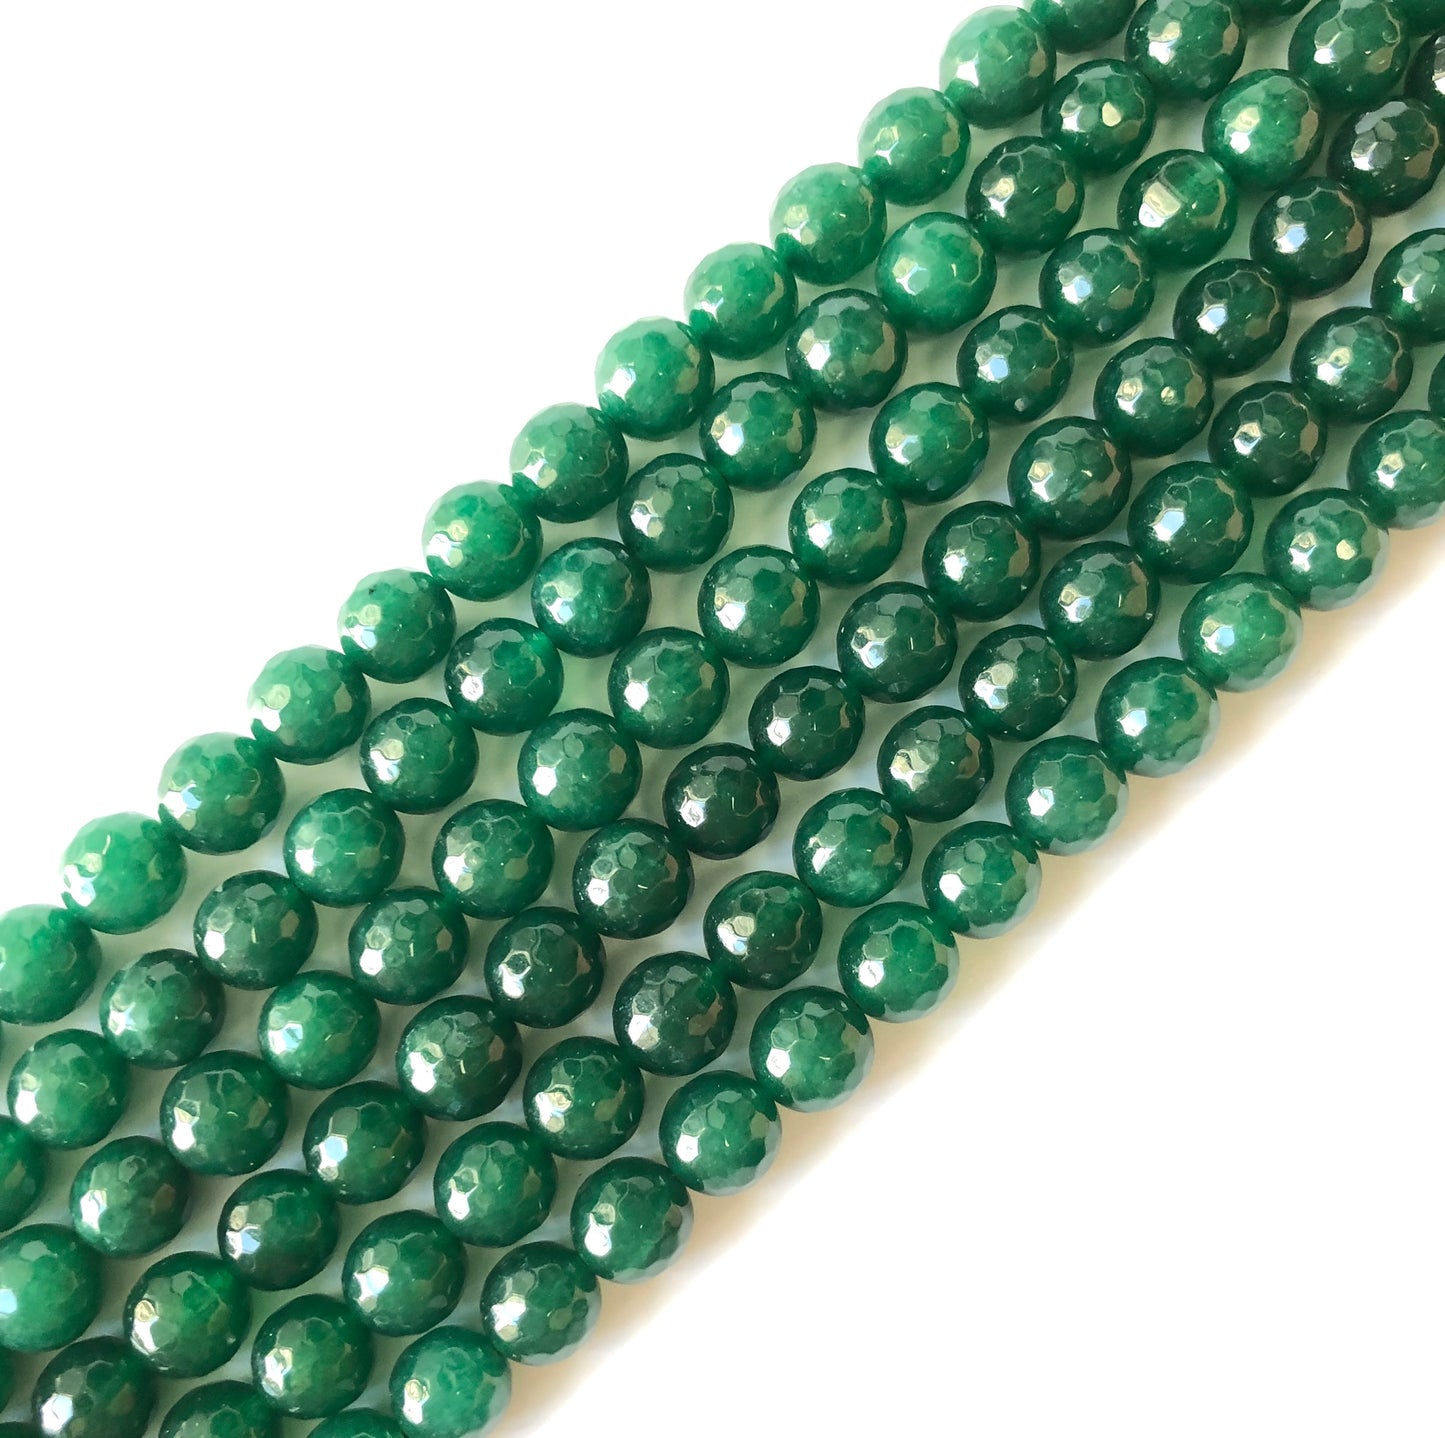 2 Strands/lot 10mm Green Faceted Jade Stone Beads Stone Beads Faceted Jade Beads Charms Beads Beyond